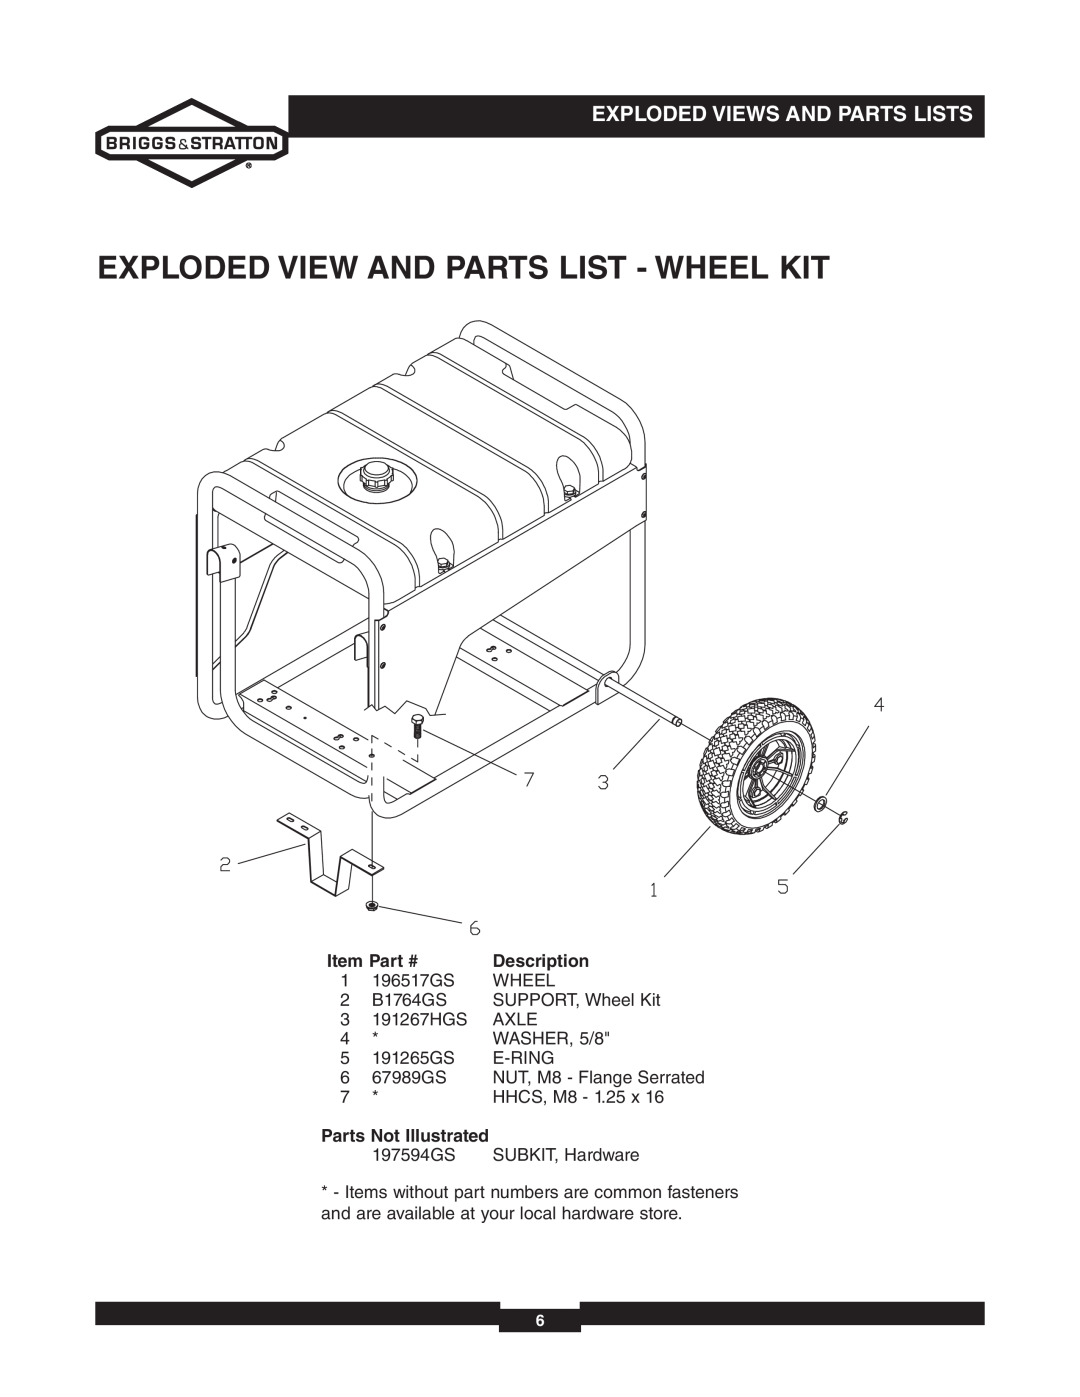 Briggs & Stratton 030235-02 manual Exploded View And Parts List - Wheel Kit, Exploded Views And Parts Lists, Description 